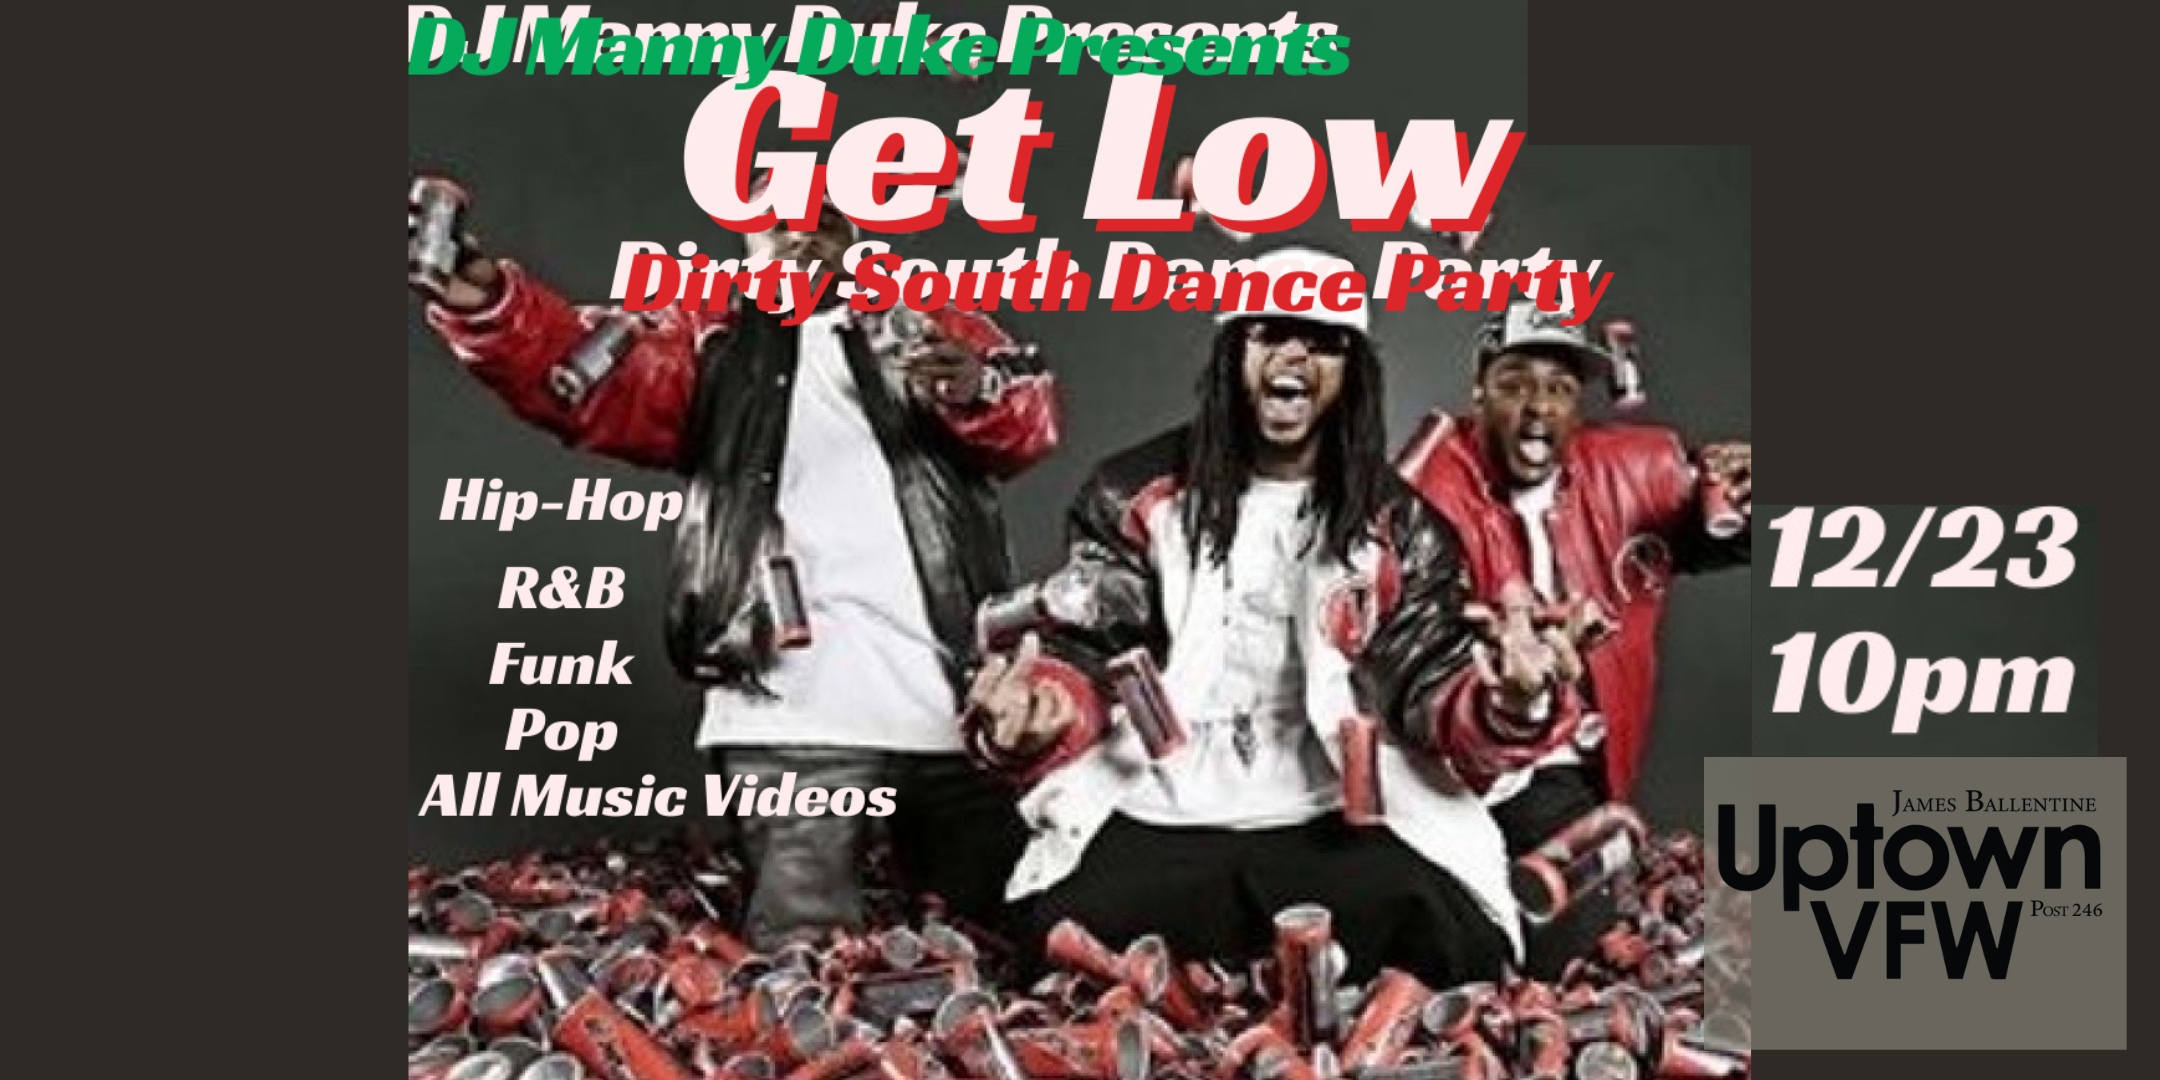 DJ Manny Duke Presents Get Low Dirty South Dance Party Hip-Hop, R&B, Funk, Pop :: All Music Videos Saturday, December 23 James Ballentine "Uptown" VFW Post 246 Doors 10:00pm :: Music 10:00pm :: 21+ GA $5 ADV / $10 DOS NO REFUNDS Ticket On-Sale Now